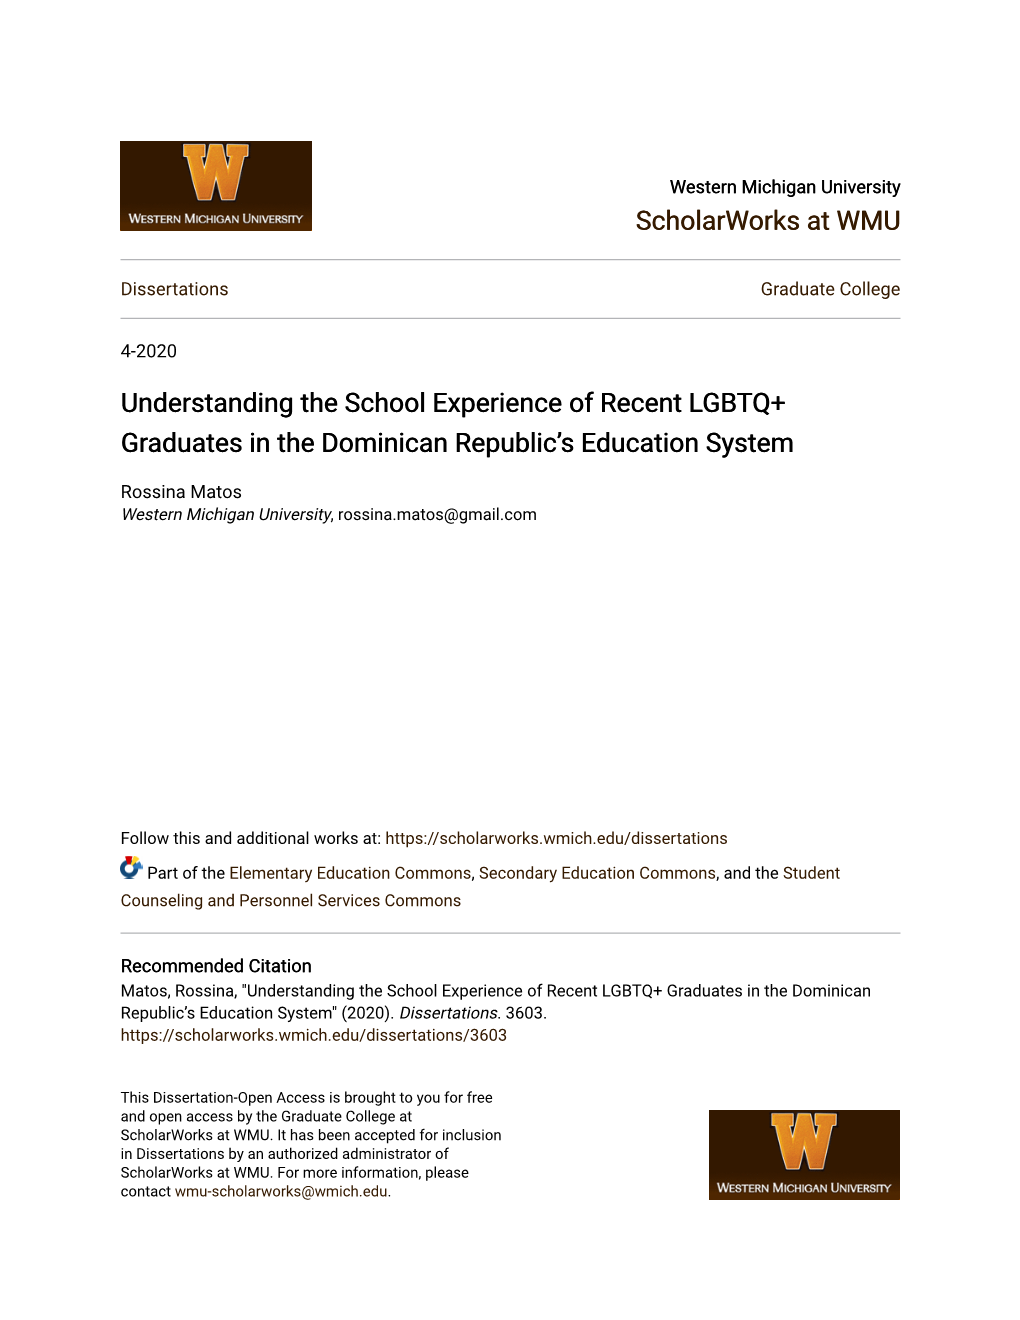 Understanding the School Experience of Recent LGBTQ+ Graduates in the Dominican Republic’S Education System